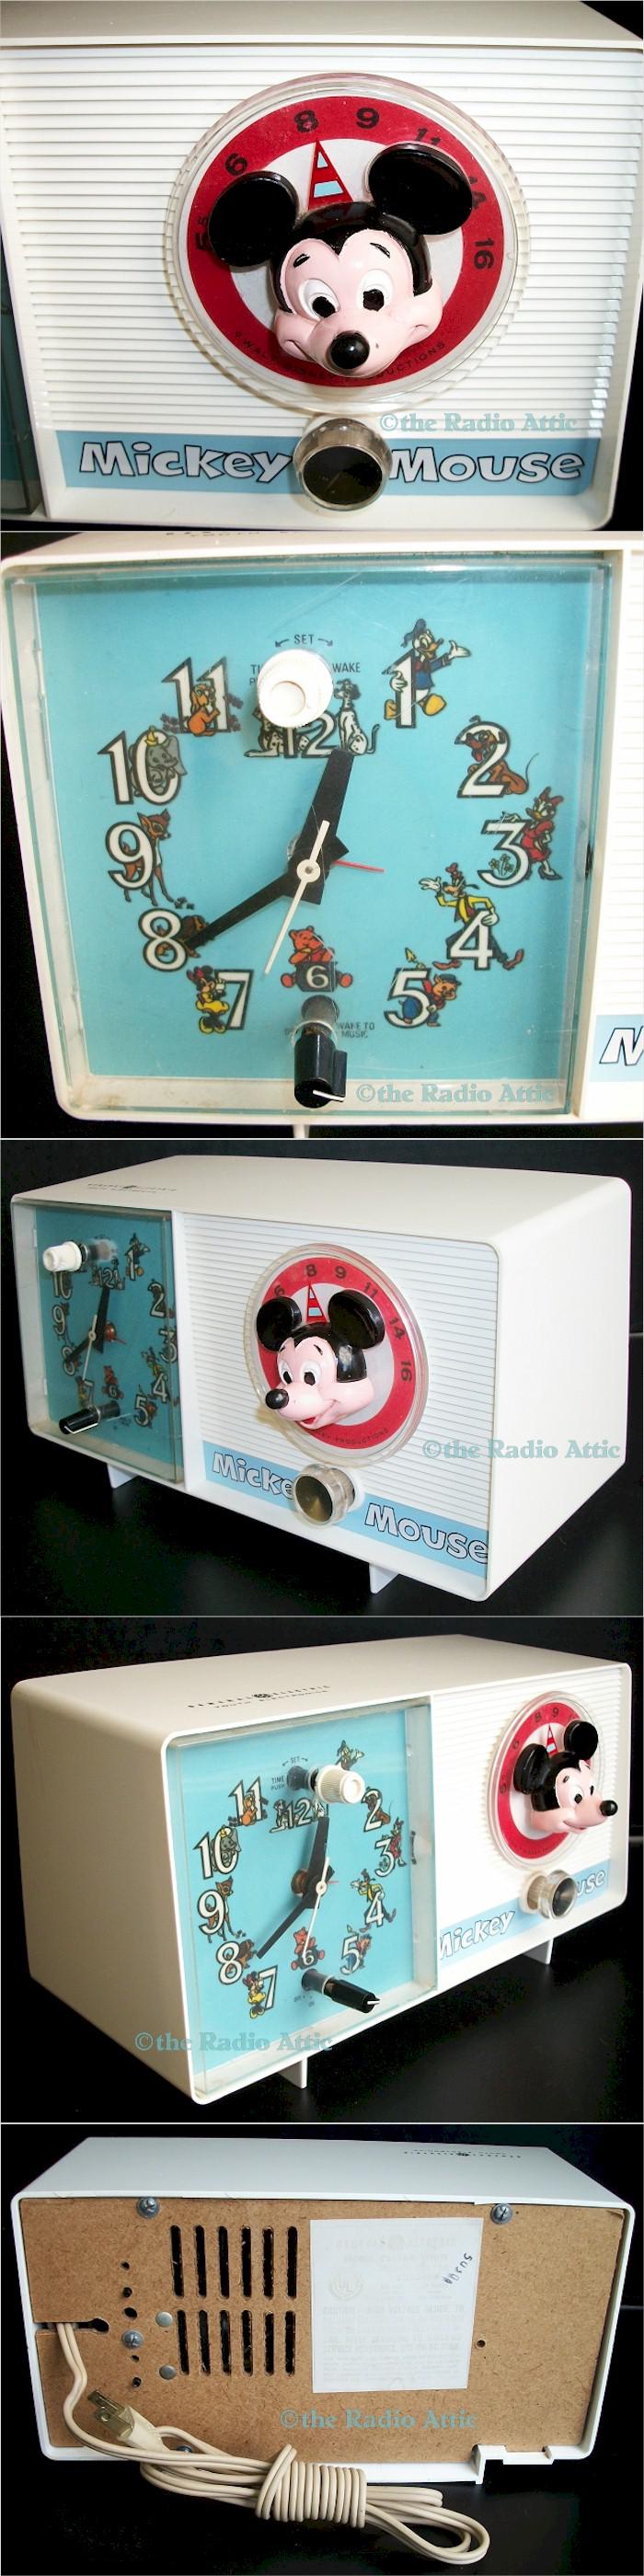 General Electric C2418A "Mickey Mouse" Clock Radio (1960)